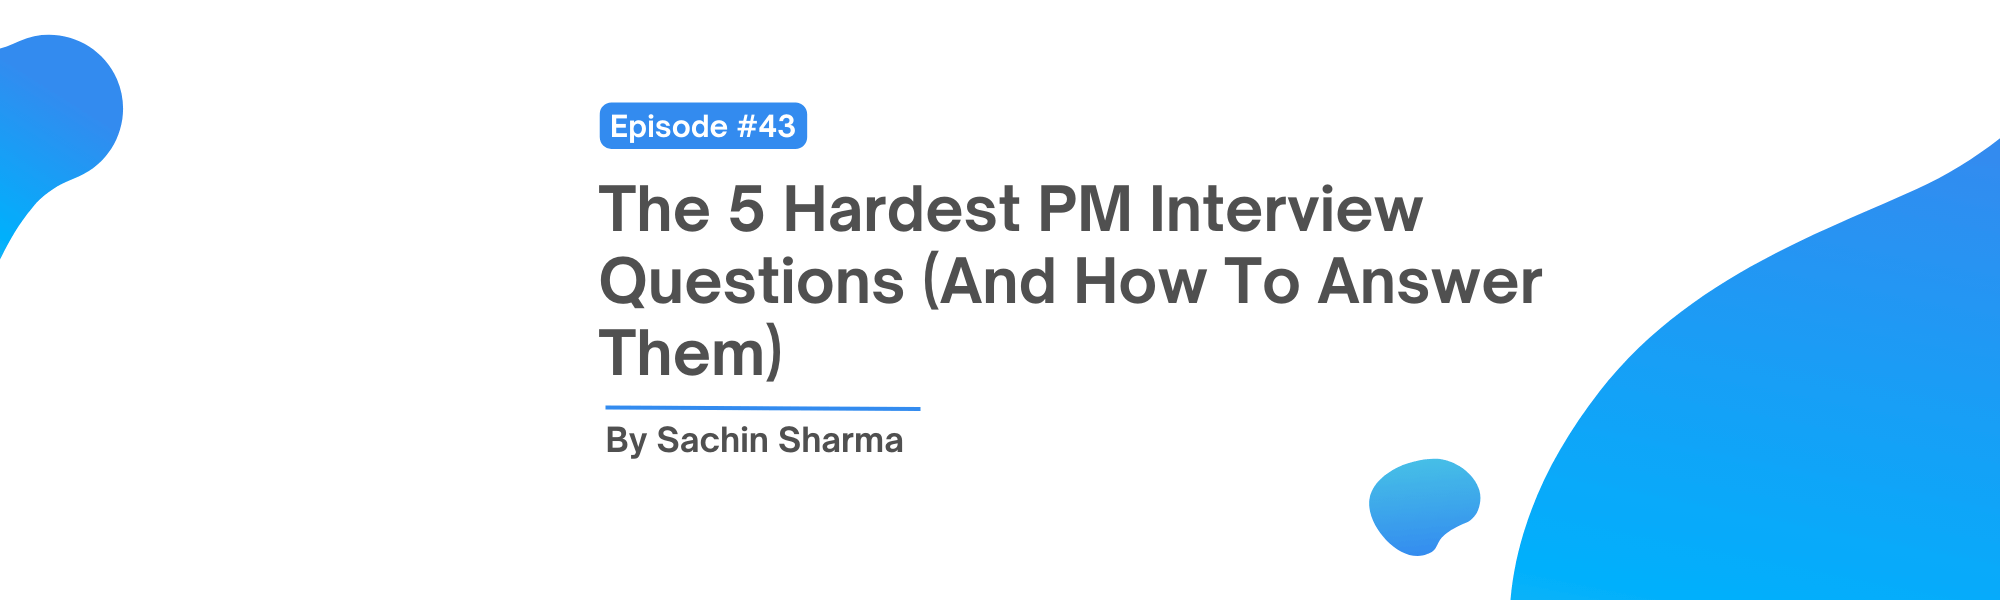 The 5 Hardest PM Interview Questions (And How To Answer Them)